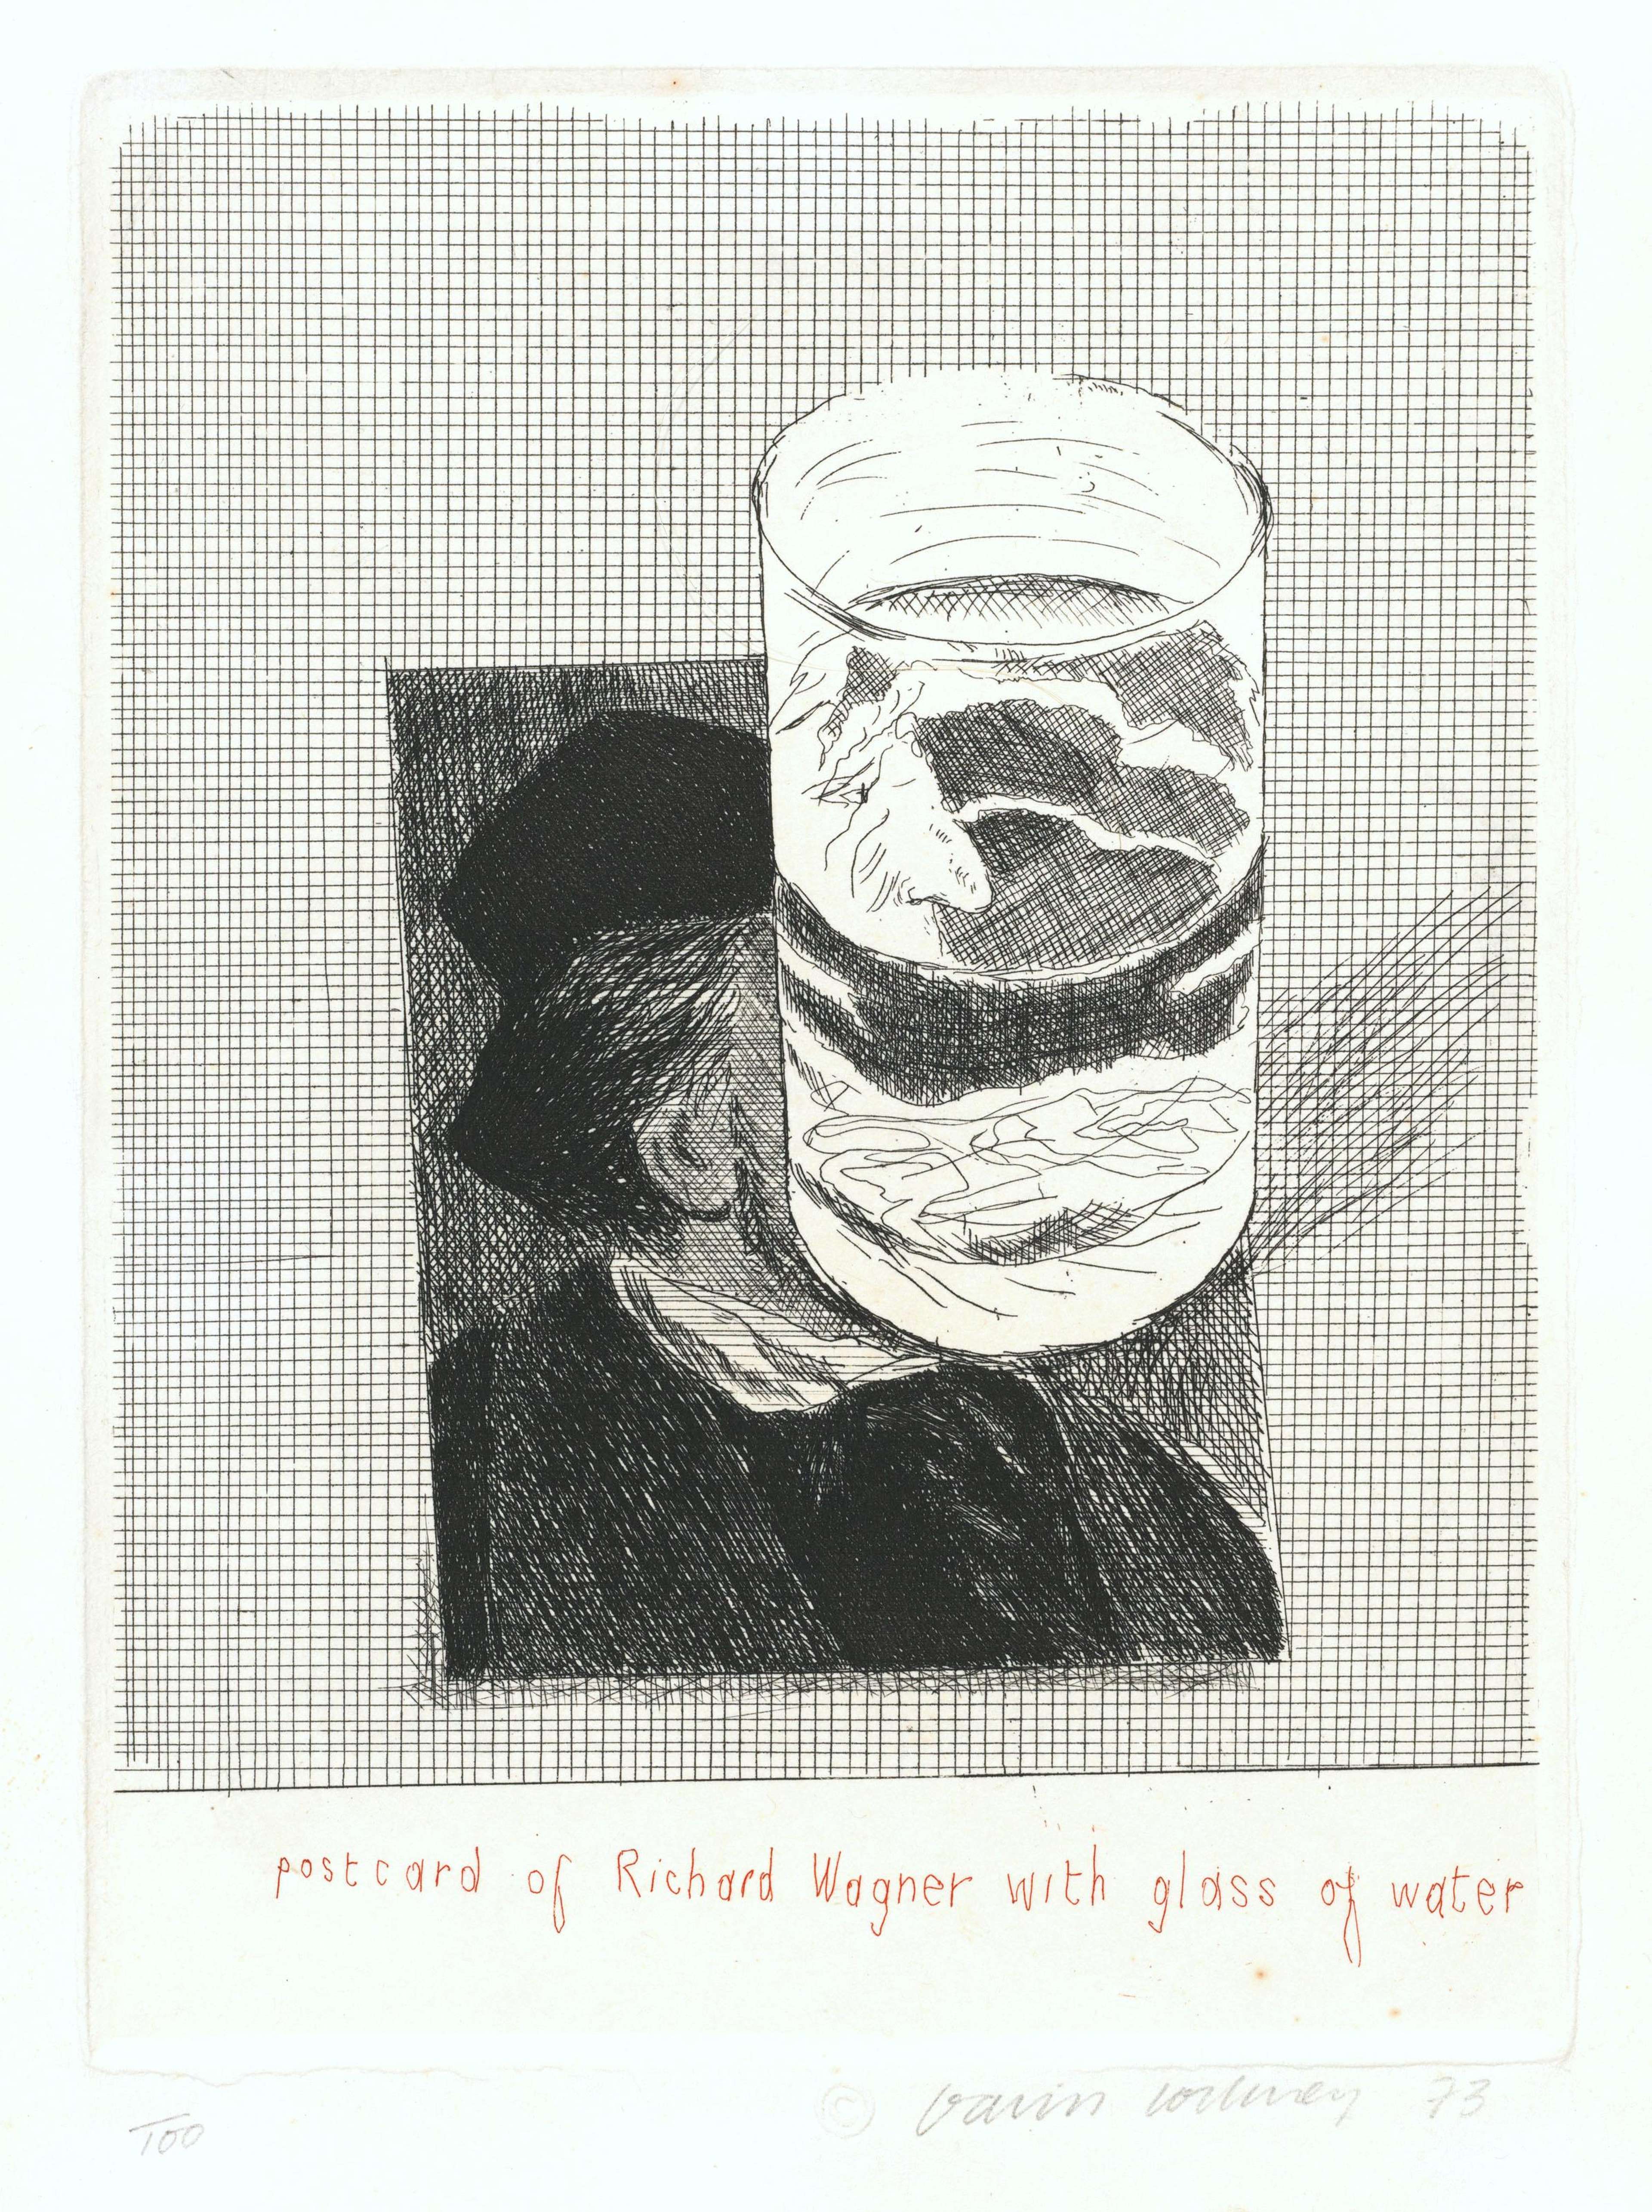 This print shows a print of composer Richard Wagner, his face obscured by a transparent glass of water.